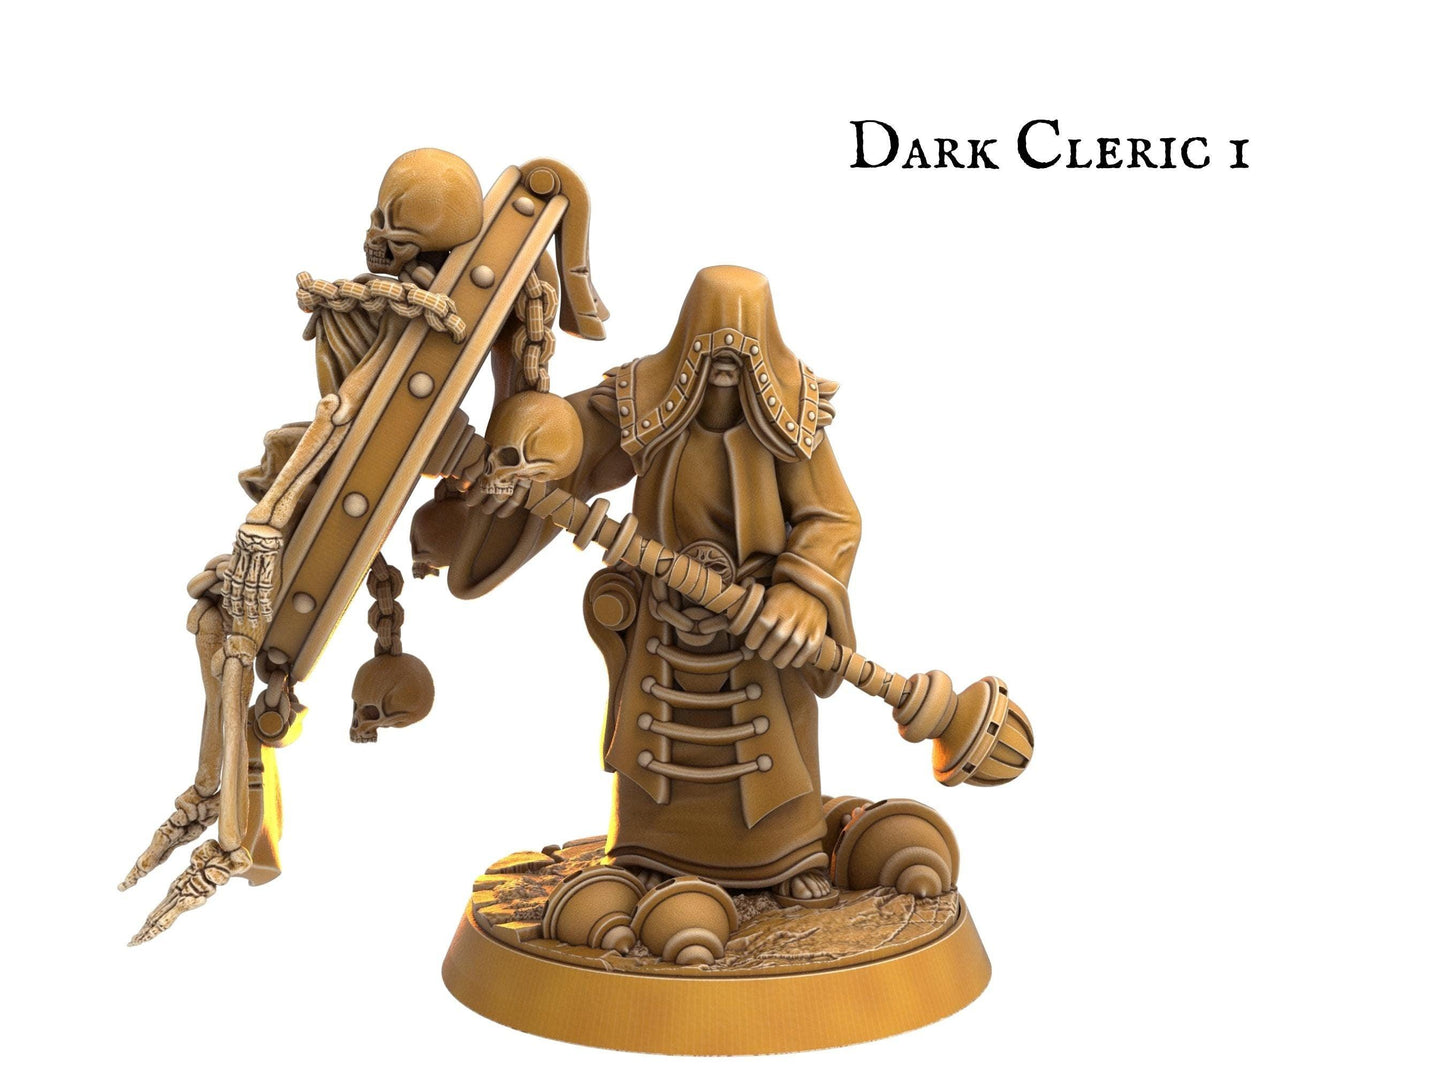 Male Dark Cleric Miniature warlock miniature - 5 Poses - 32mm scale Tabletop gaming DnD Miniature Dungeons and Dragons dnd cleric - Plague Miniatures shop for DnD Miniatures